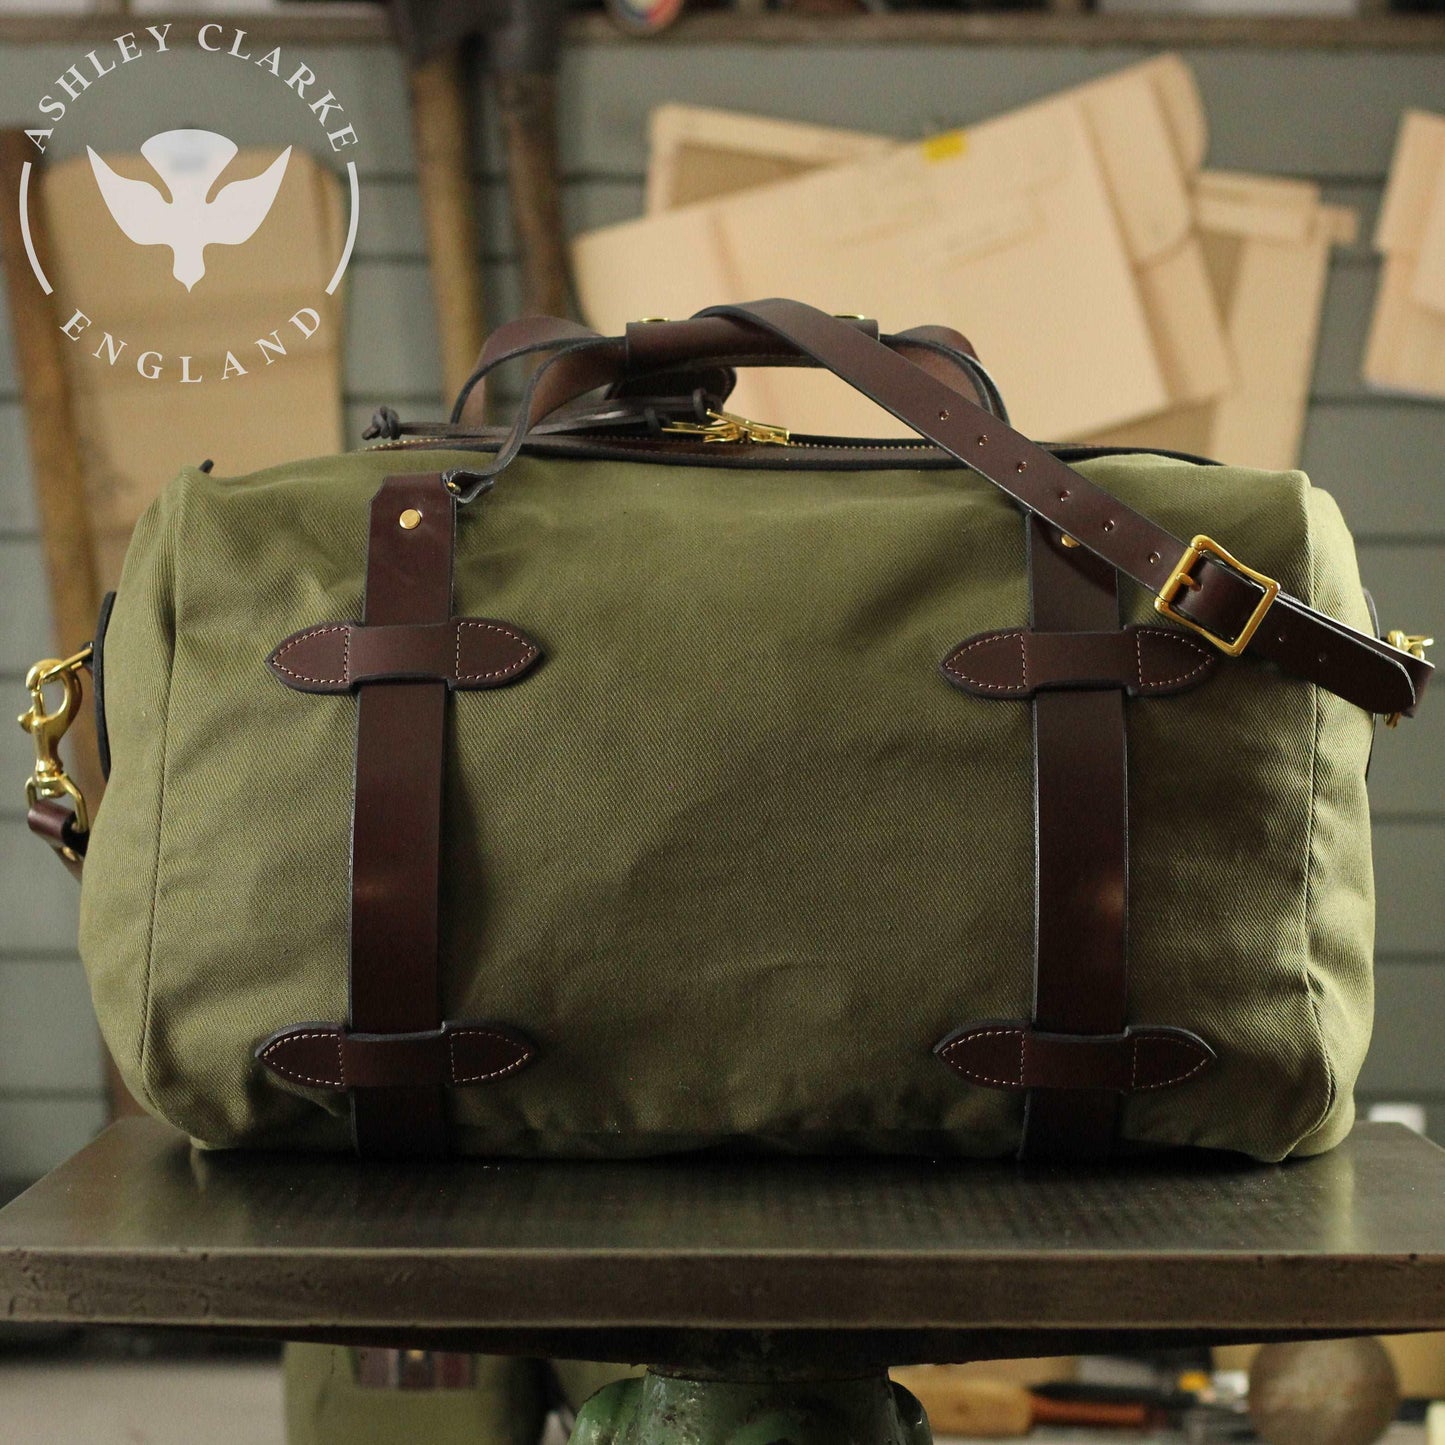 a green waxed canvas holdall bag by ashley clarke england on top of a table 1